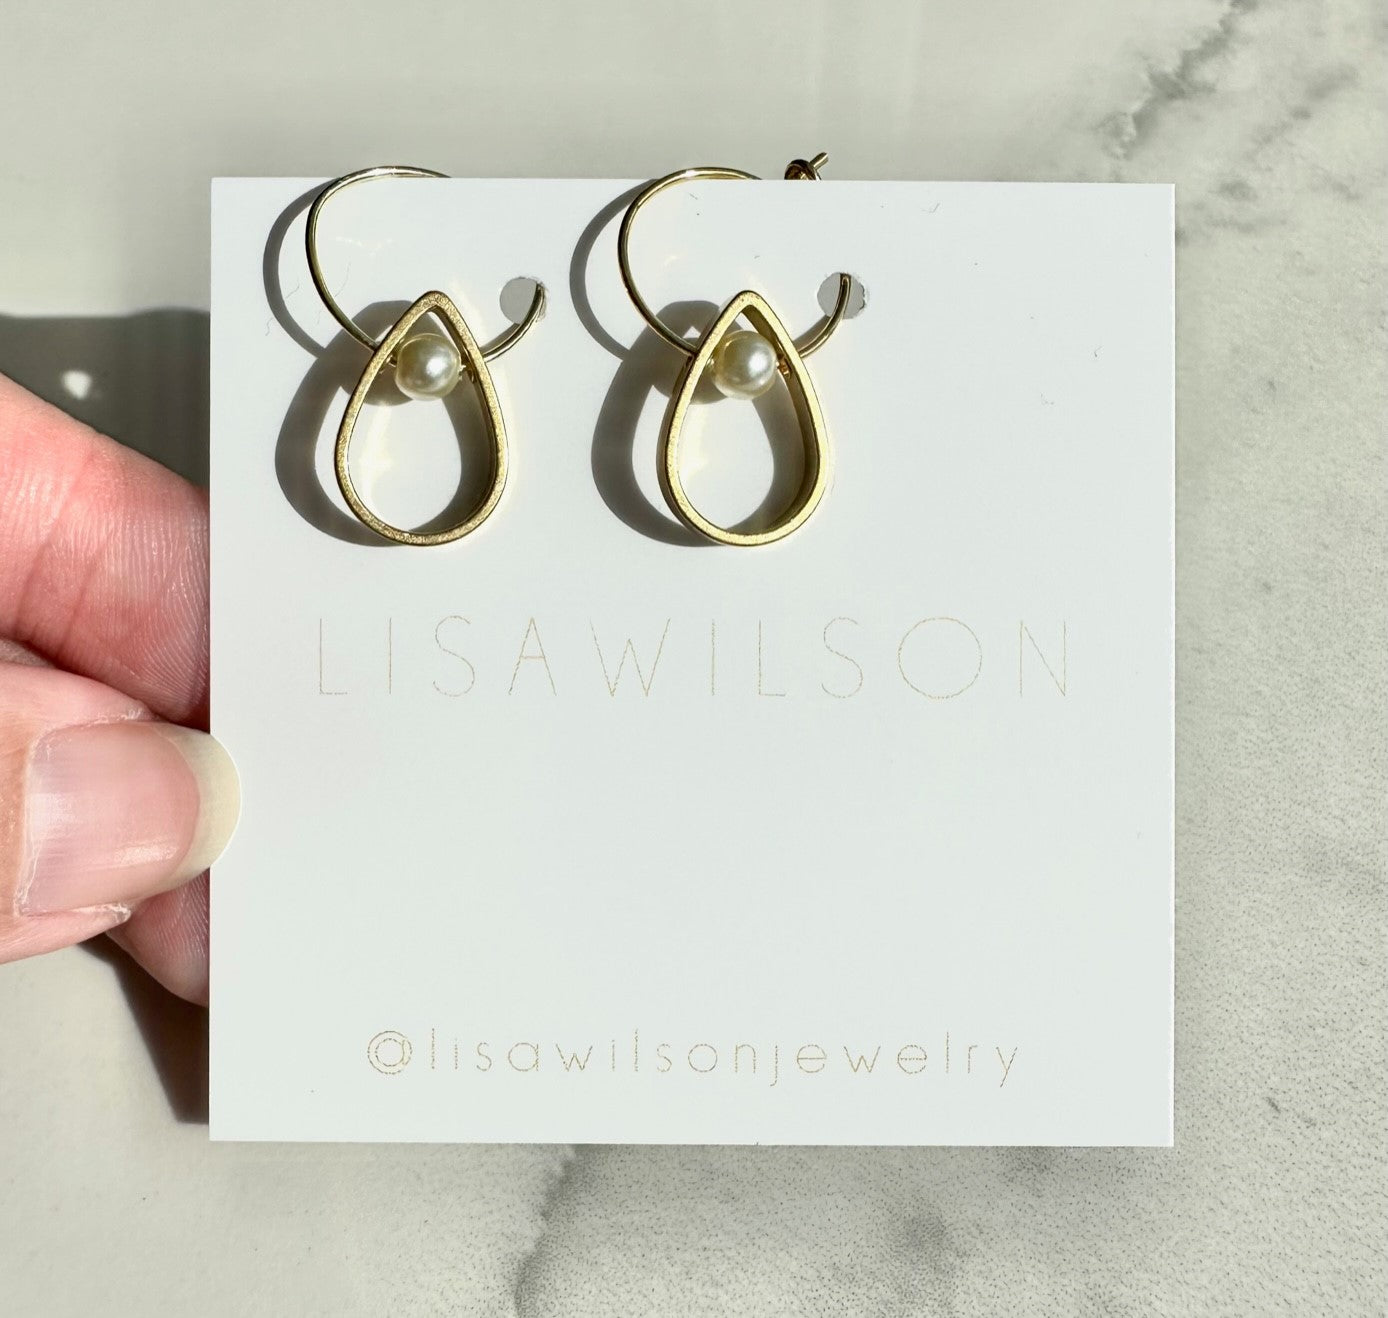 Small Brass Hoop Earrings with Teardrop Cutout and Small Freshwater Pearls